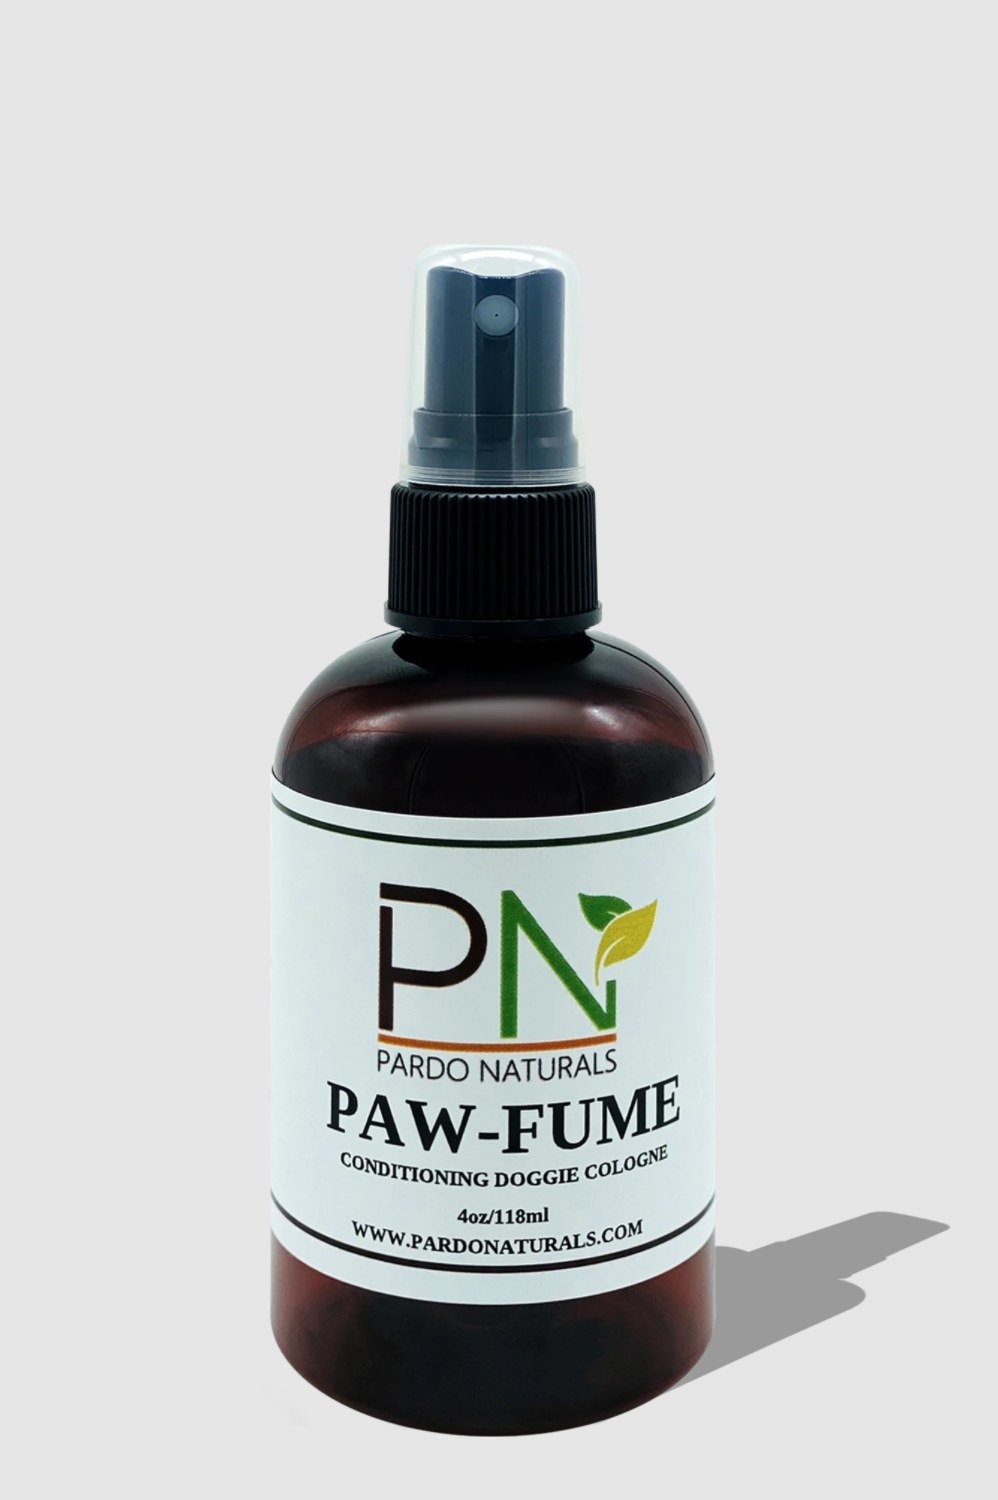 The paw-fume container